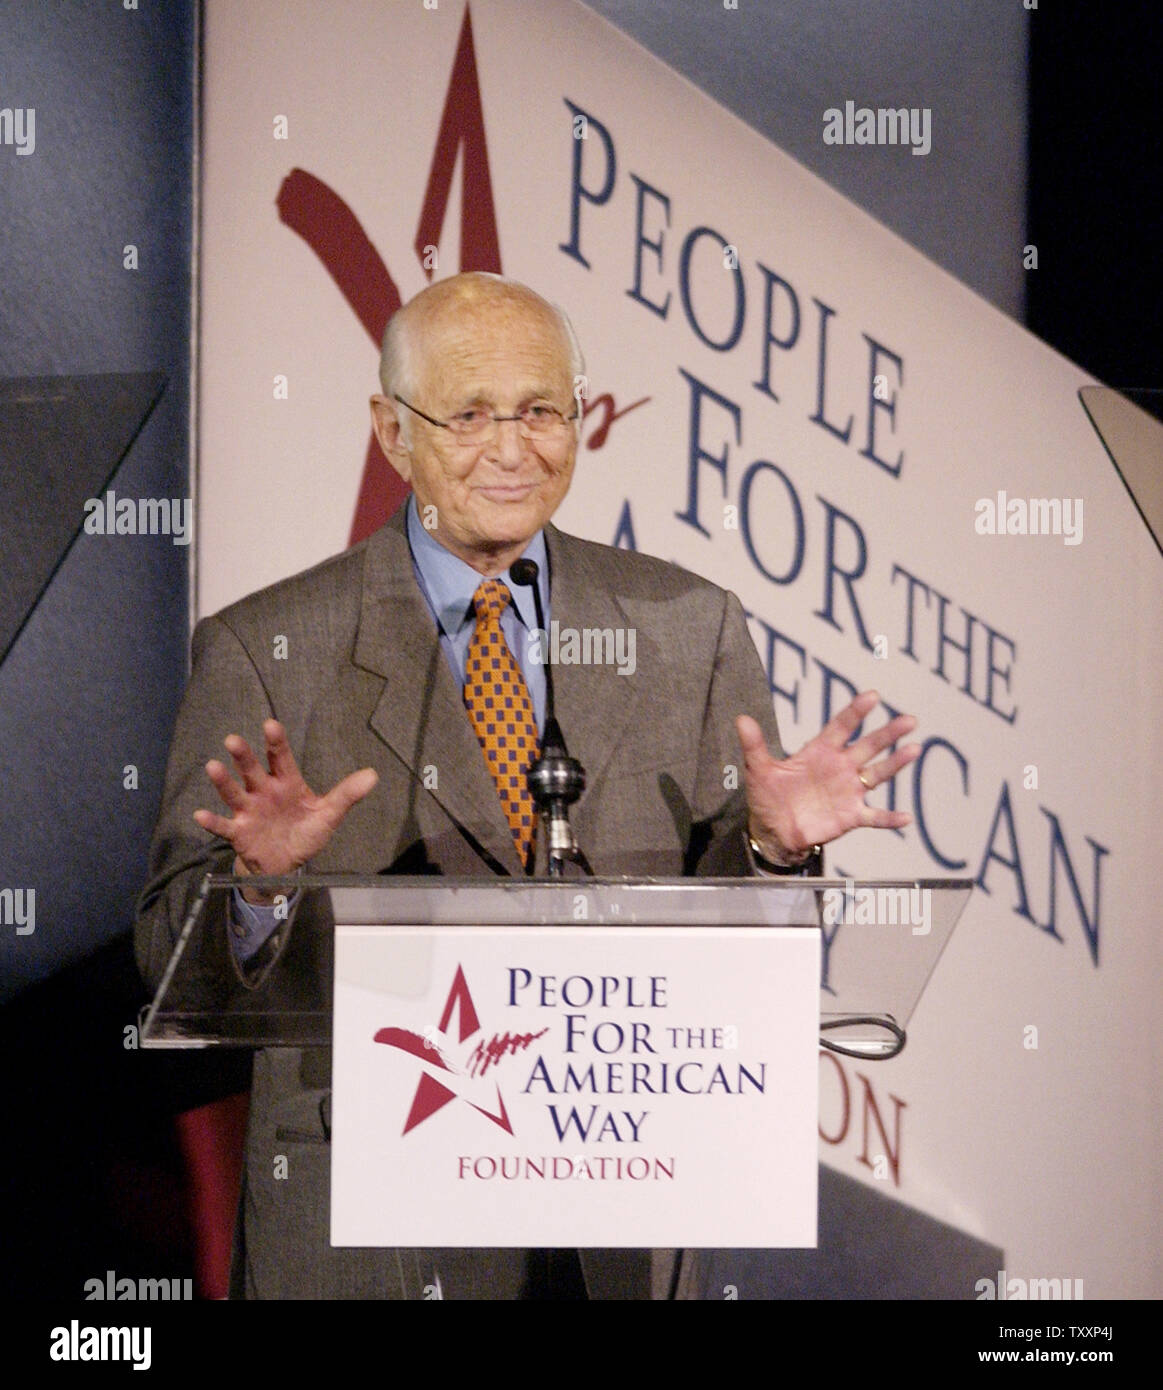 Producer Norman Lear introduces Bill Moyers at the People for the ...